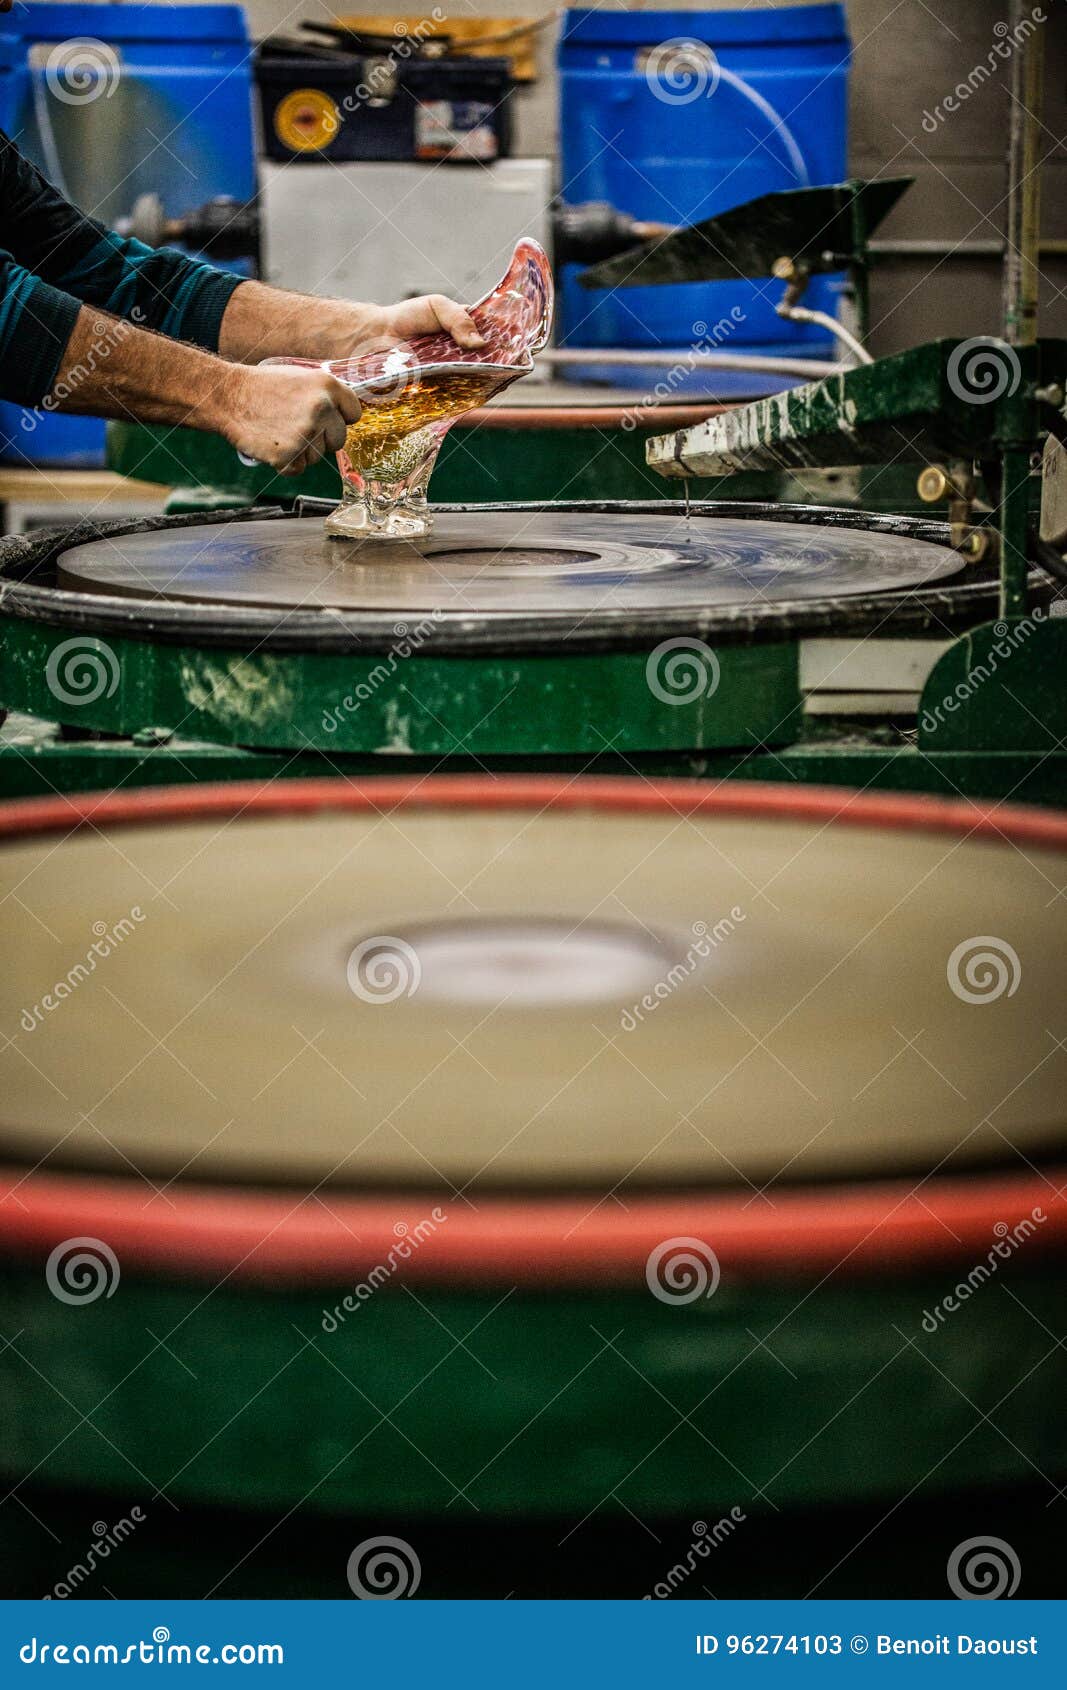 man working a glass blown vase on silica sanding disk